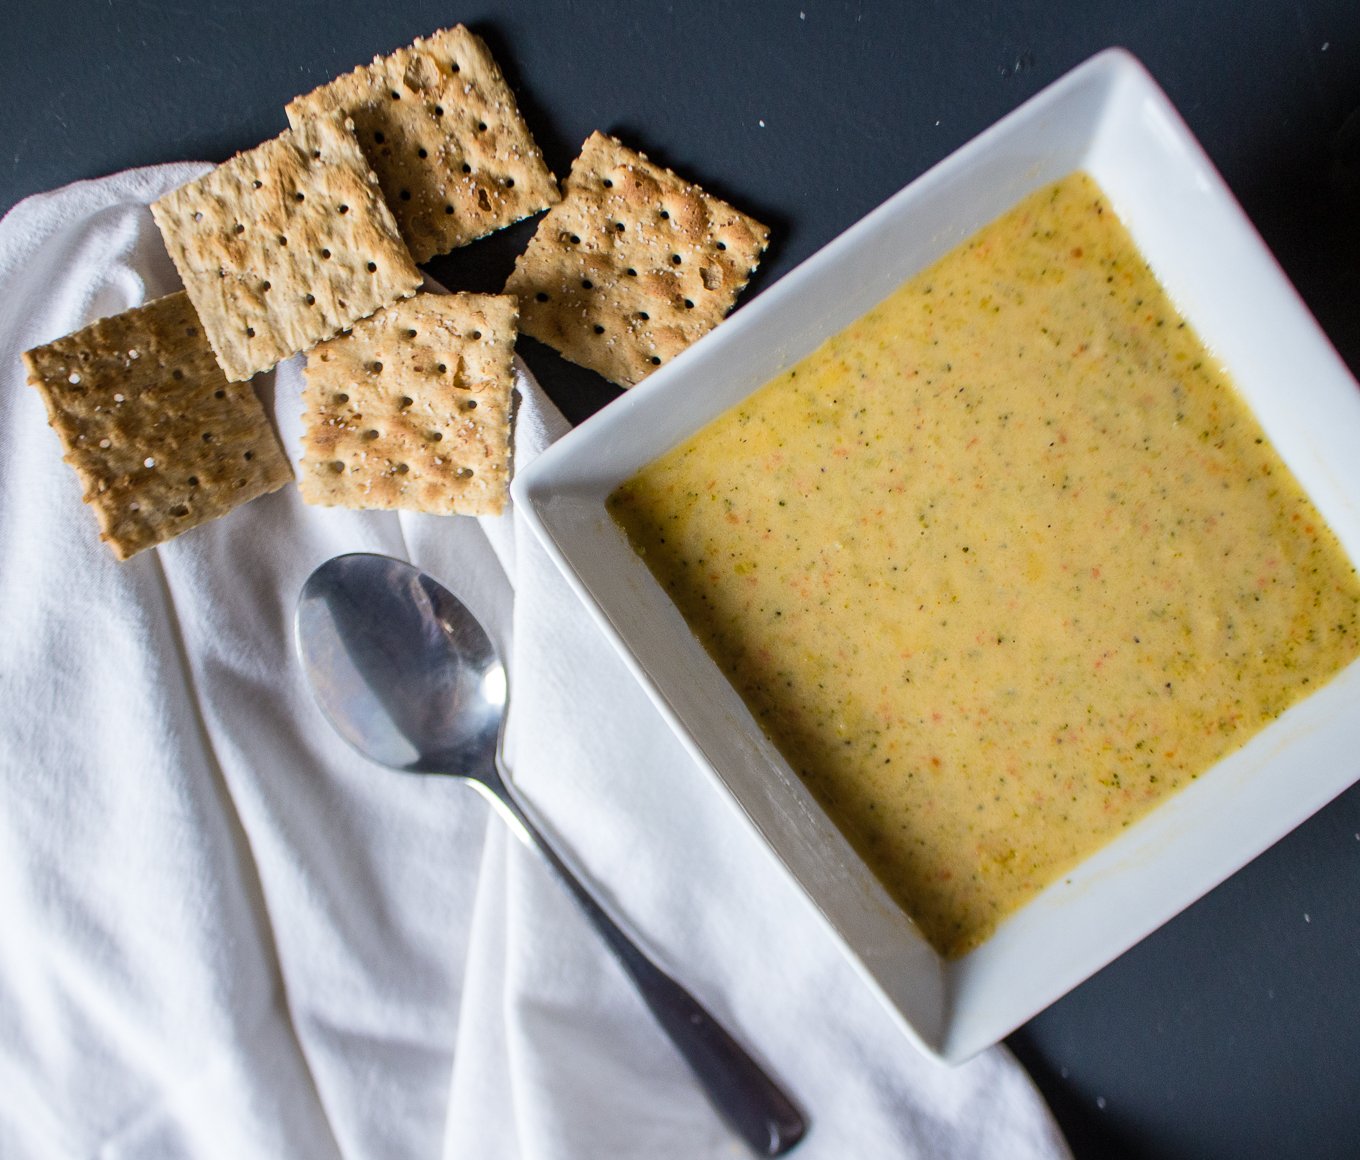 The Kentucky Gent, a men's fashion and lifestyle blogger, shares a recipe for Broccoli Cheddar soup.